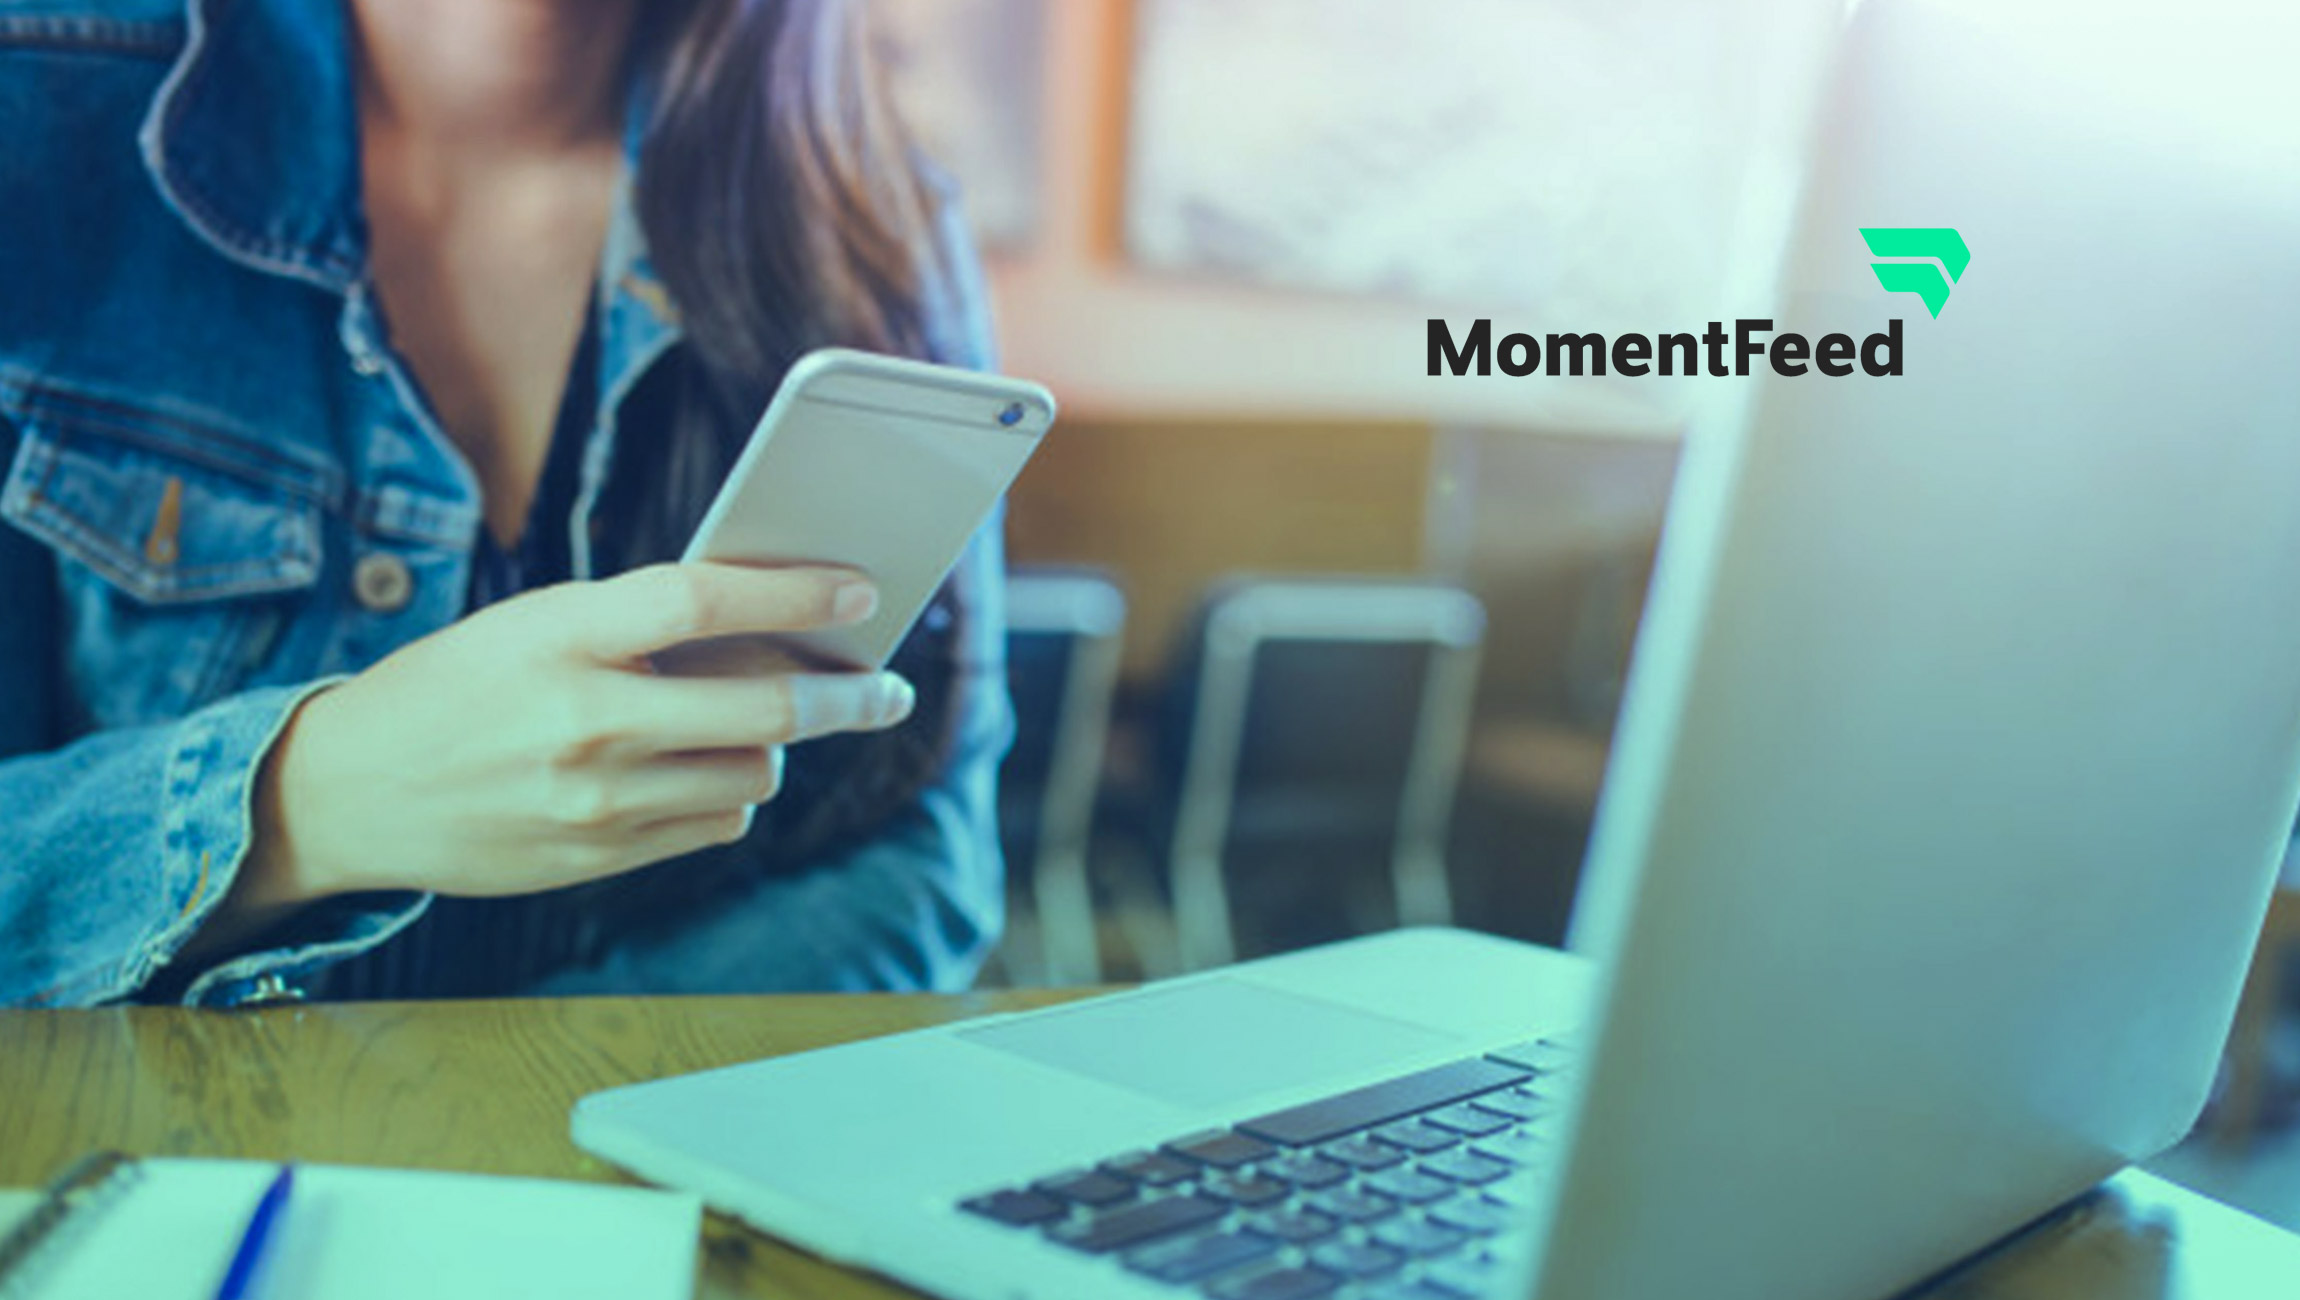 MomentFeed Reports “Customer Brand Loyalty is on Life Support”